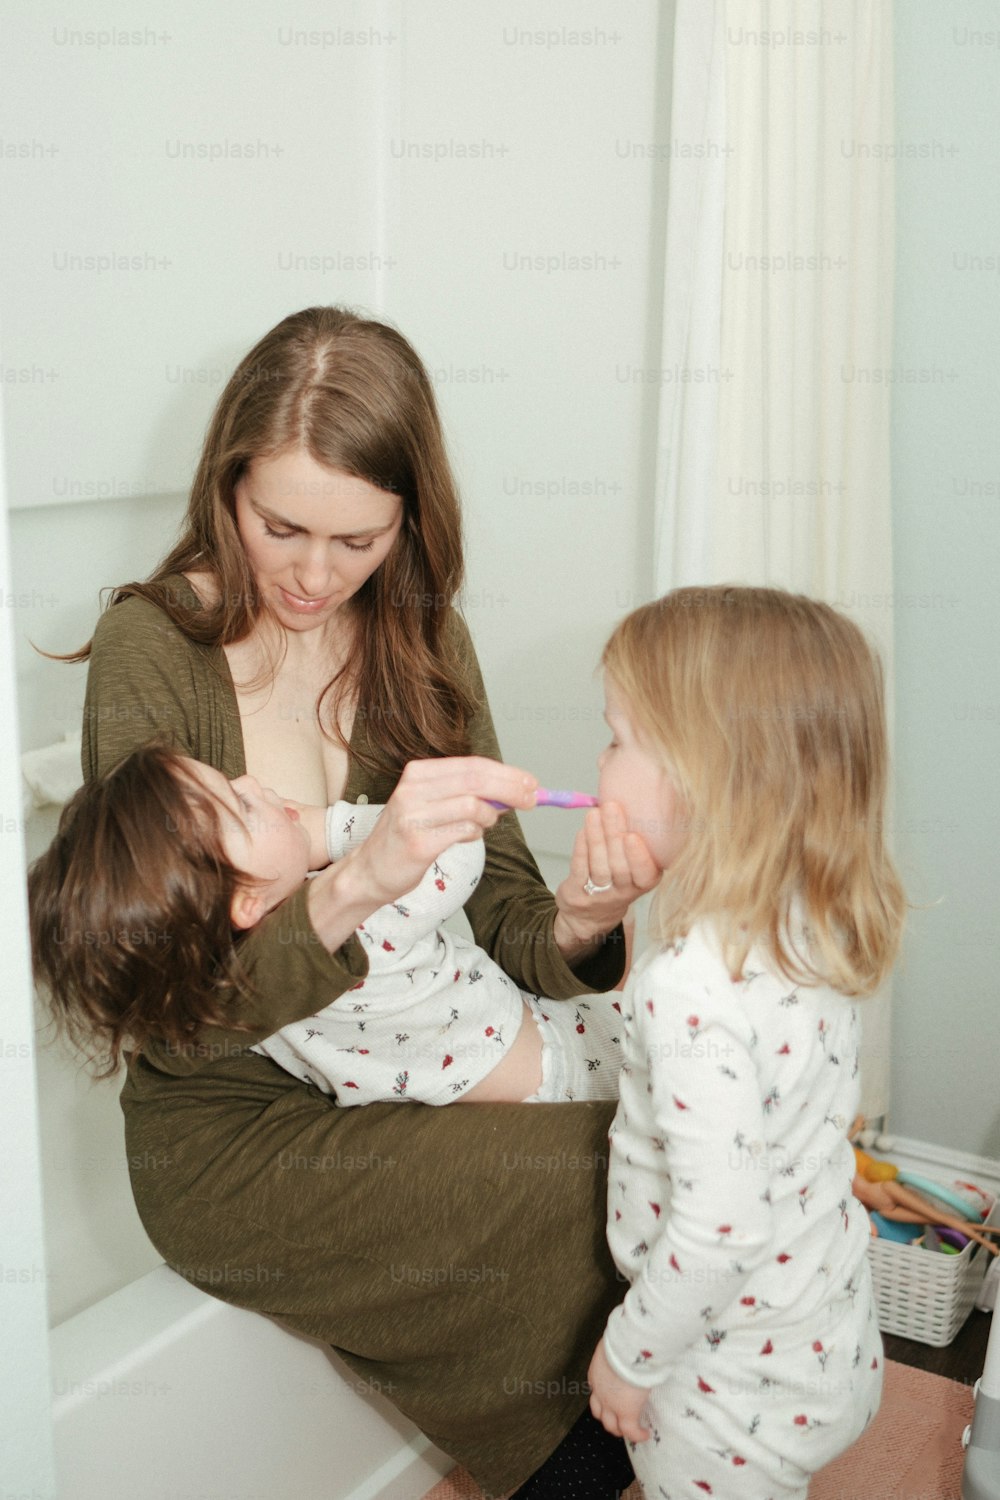 a woman brushing her teeth with two small children